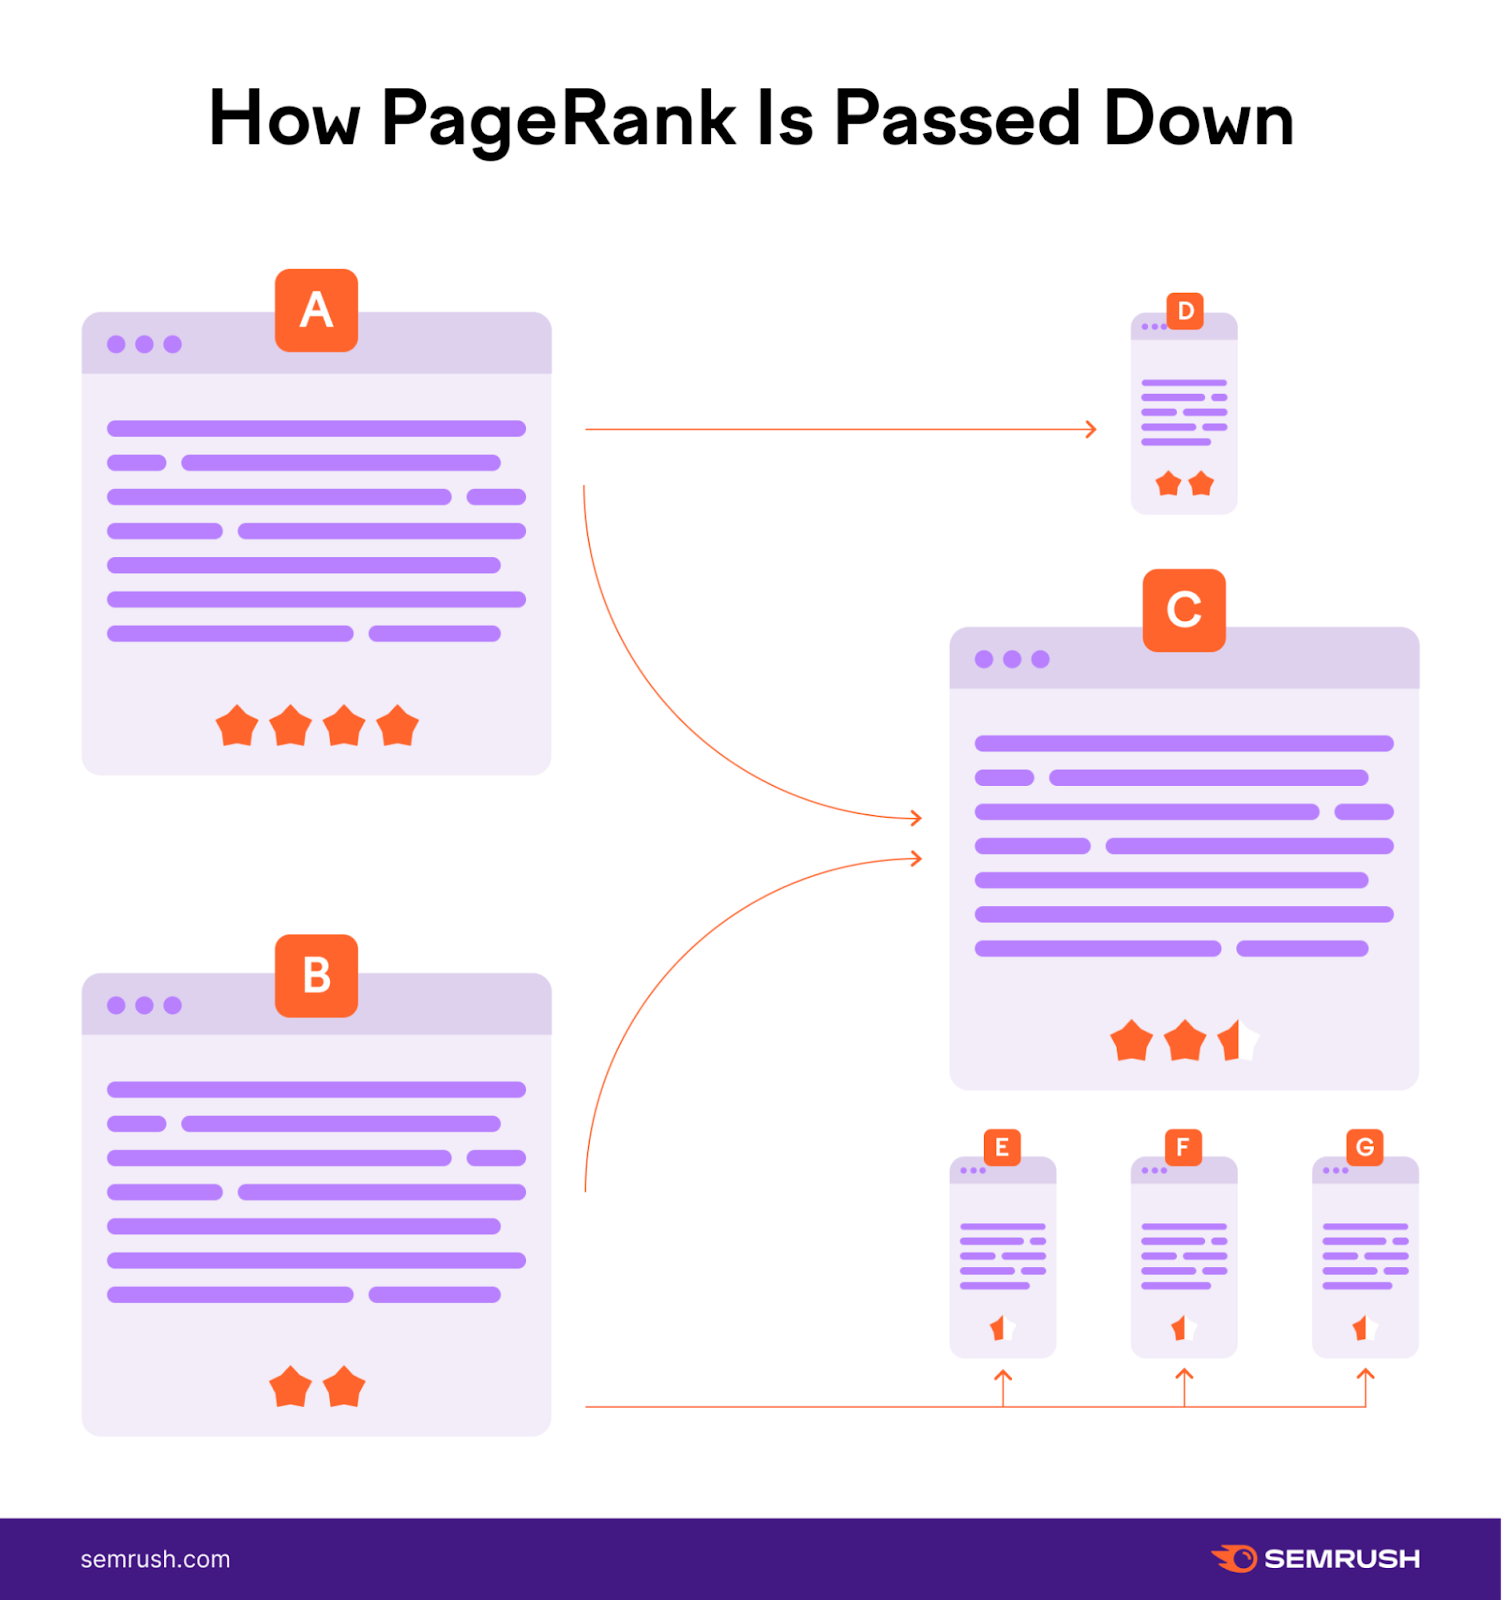 An infographic showing how PageRank is passed on